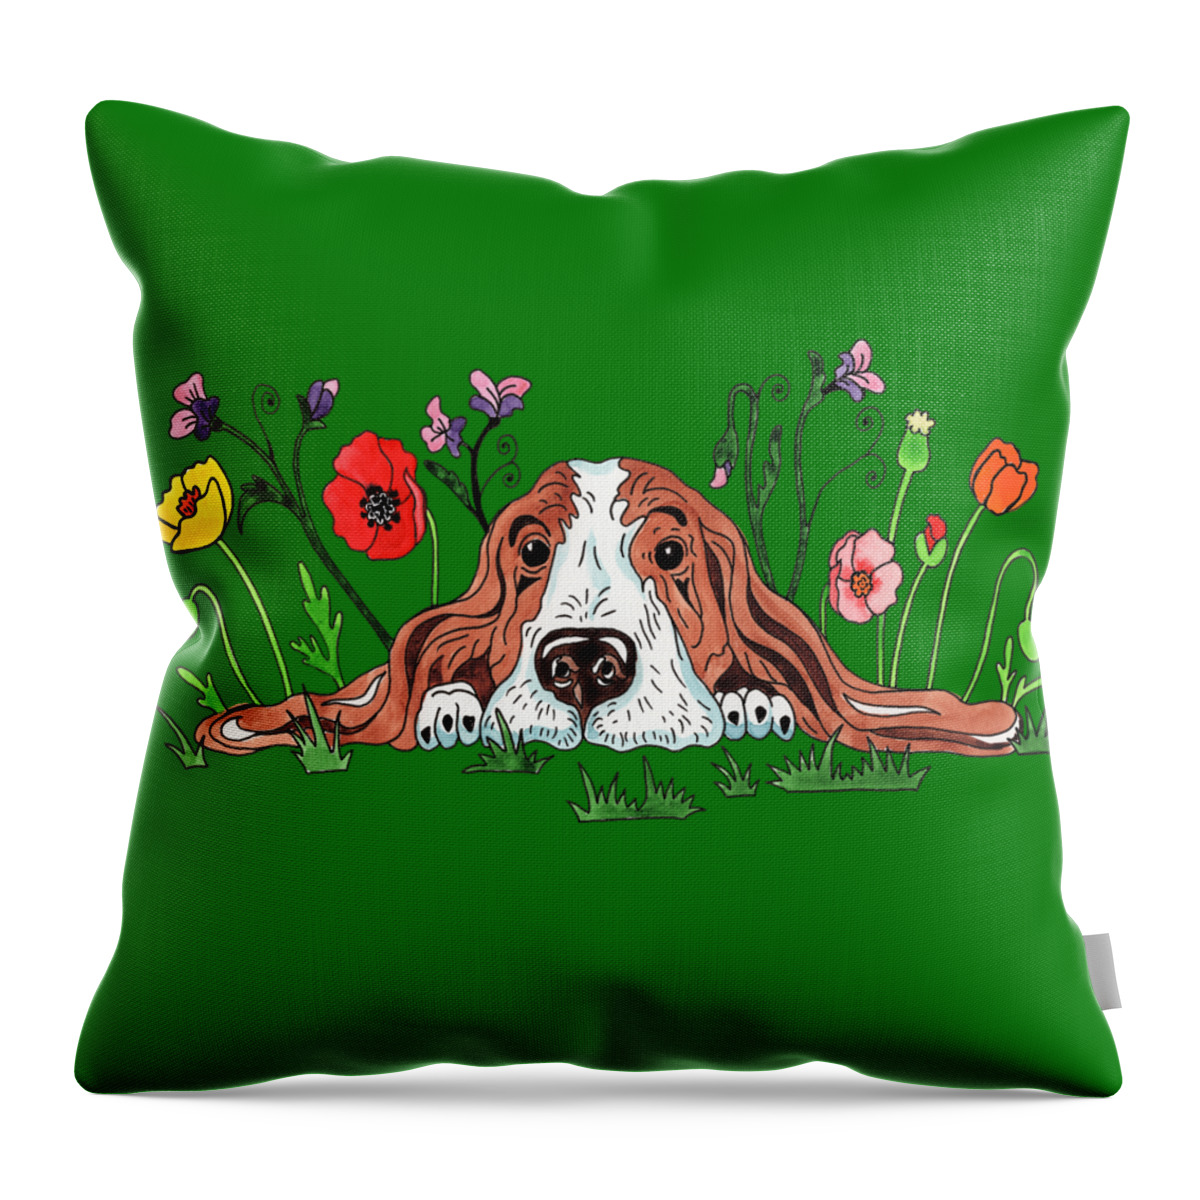 Sweet Throw Pillow featuring the painting Super Cute Adorable Watercolor Basset Puppy Dog Lying In The Flowers by Irina Sztukowski